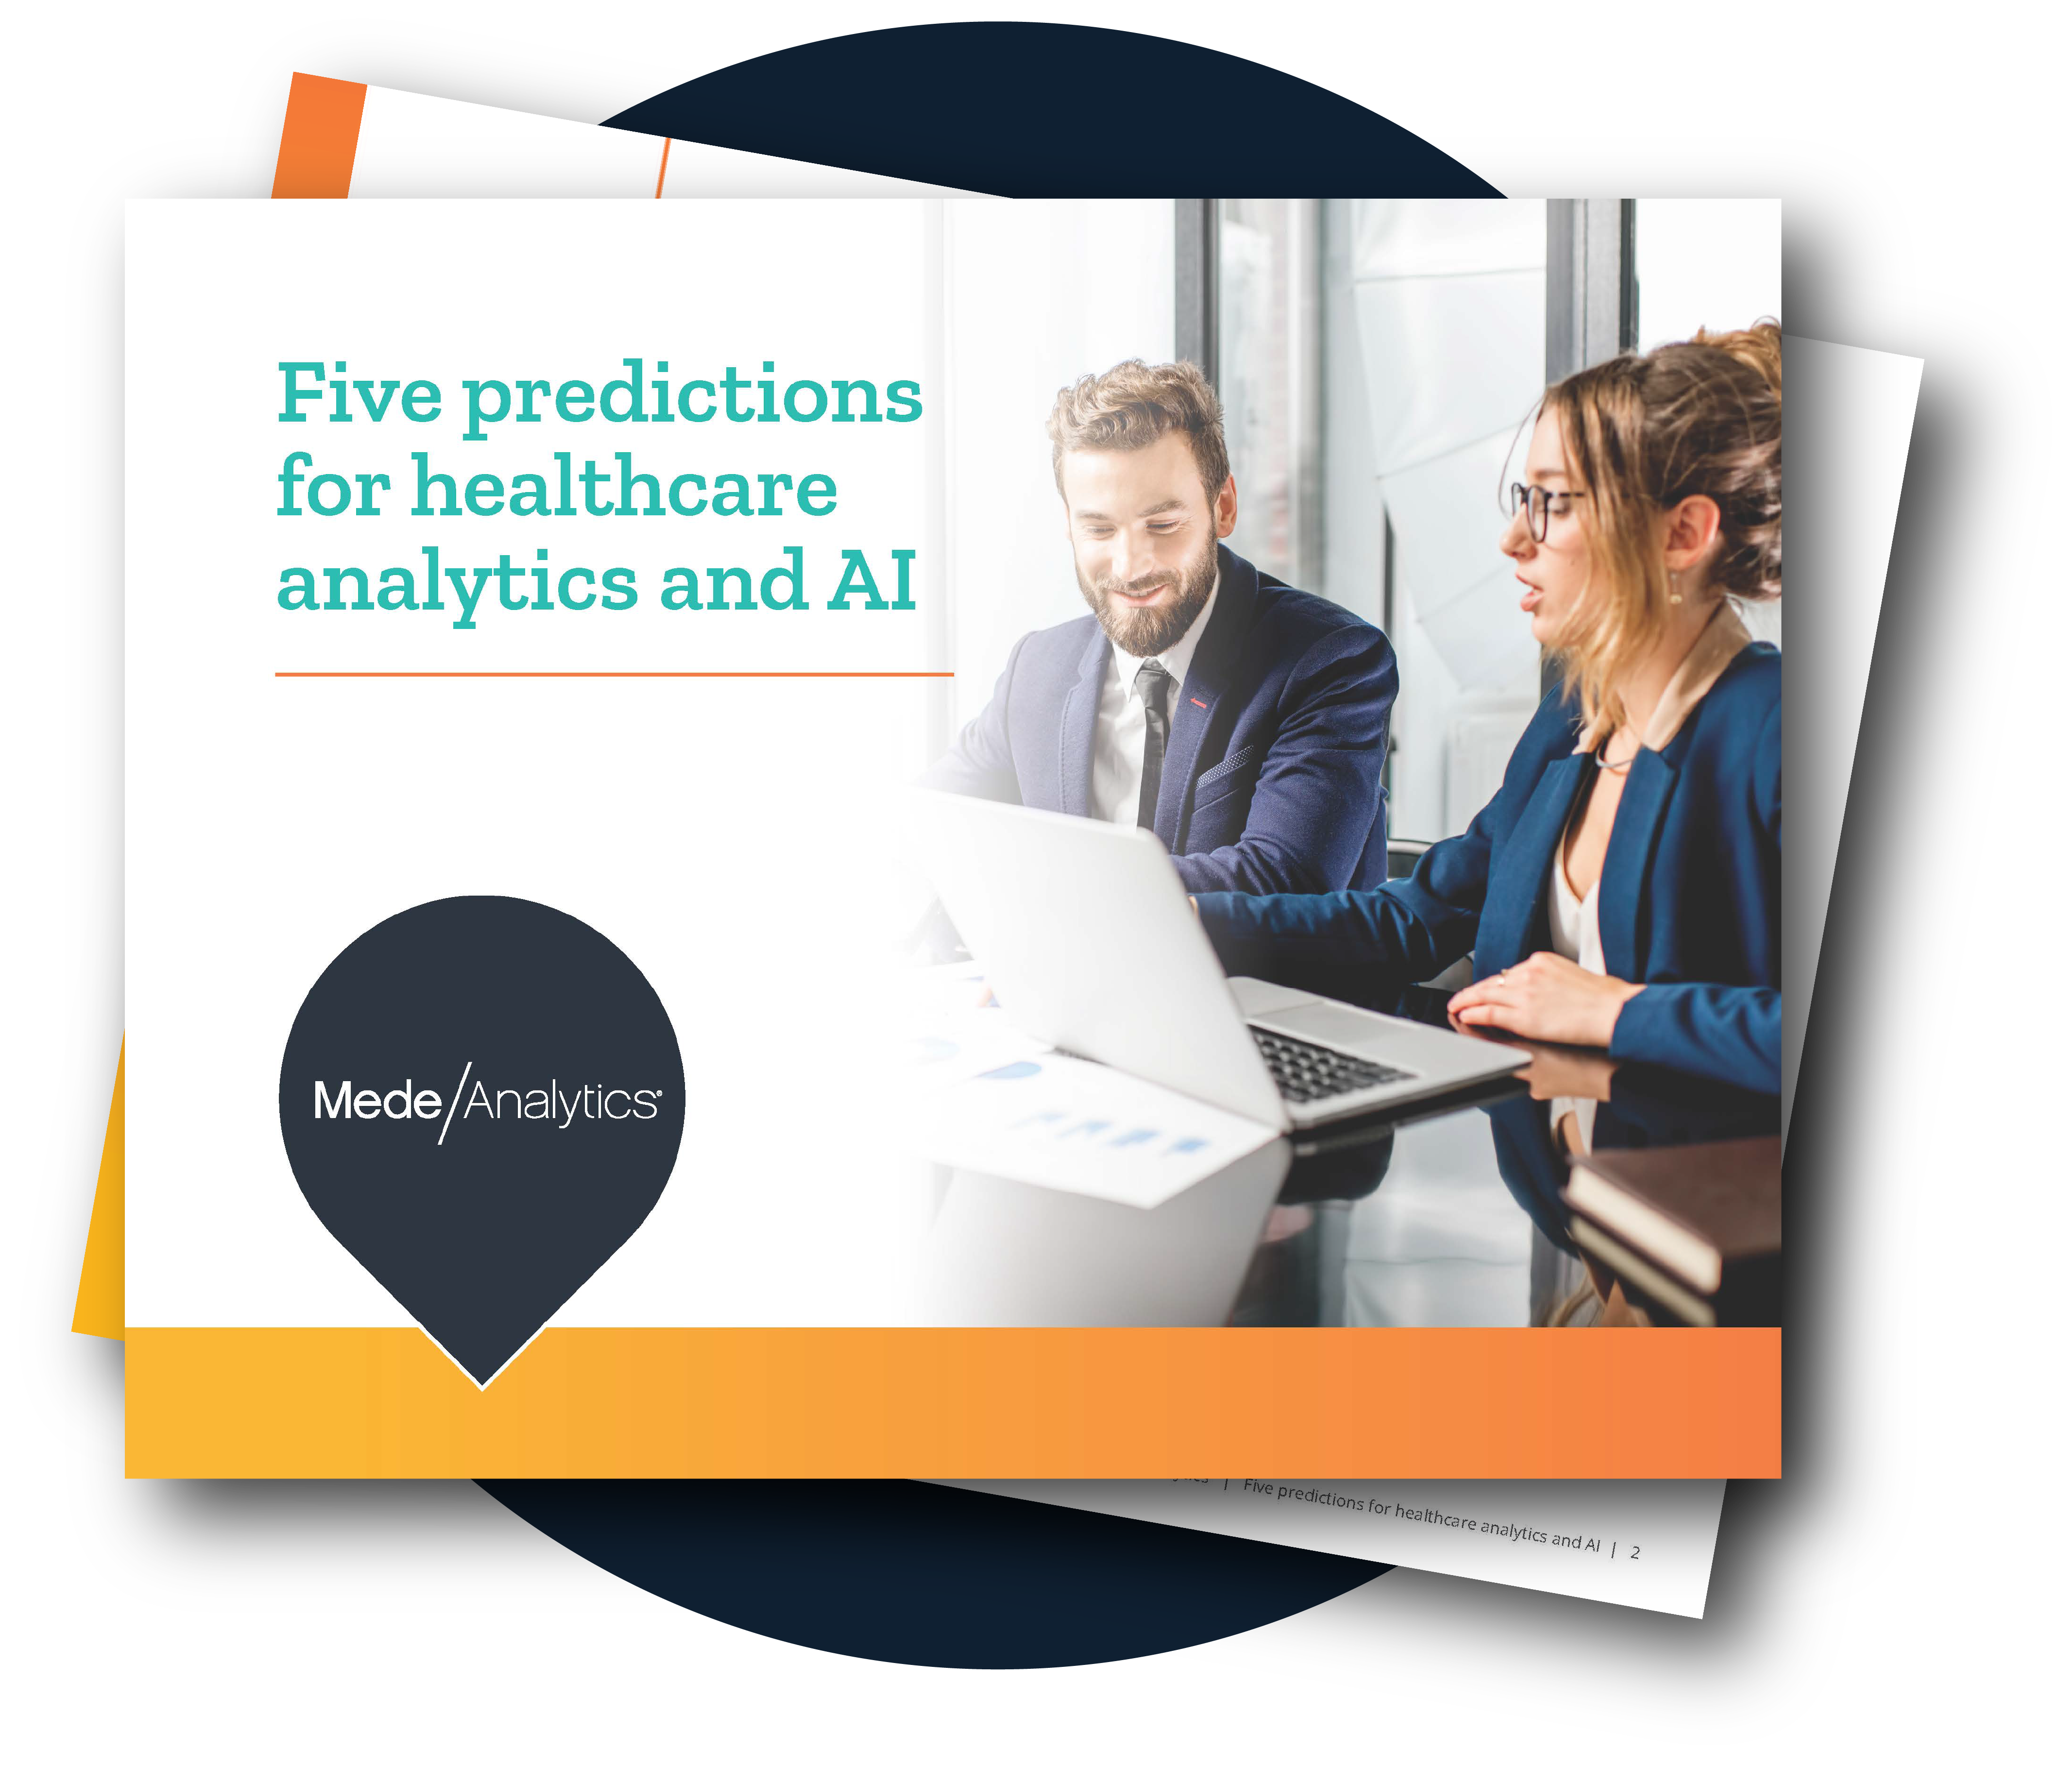 maximize the potential of analytics and AI at an organization,